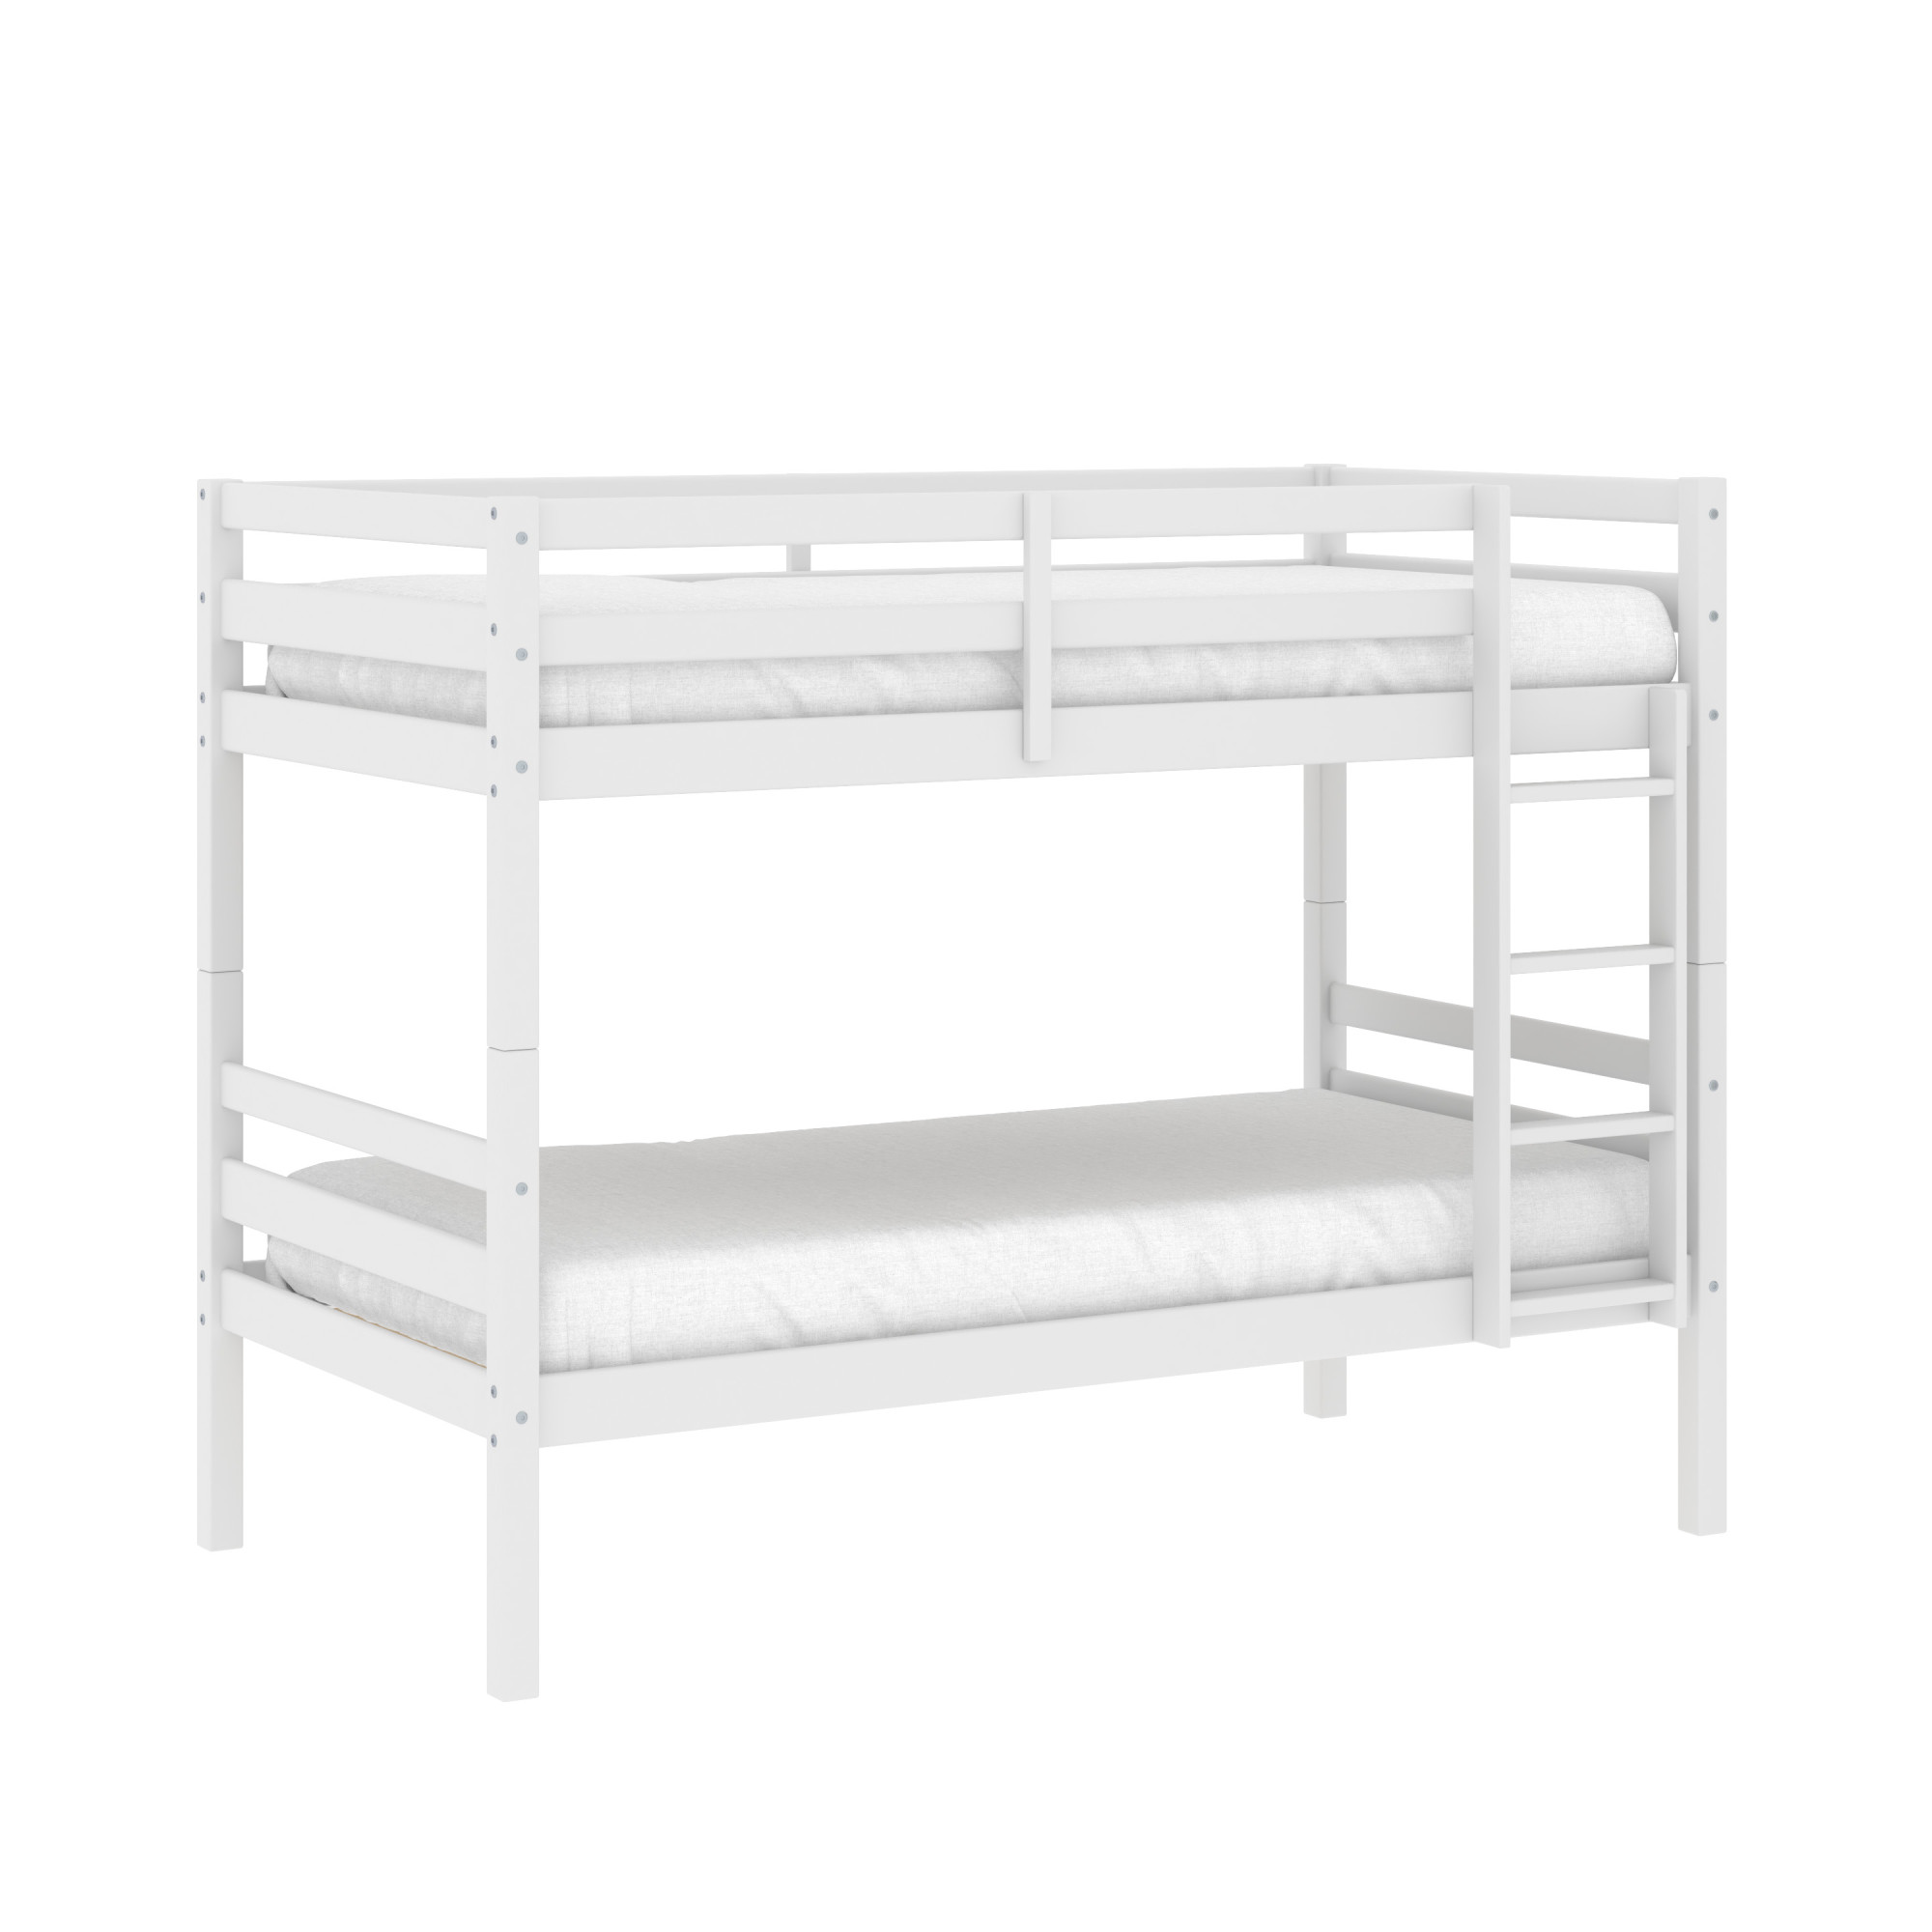 Campbell Wood Twin over Twin Convertible Bunk Bed, White - Walmart.com